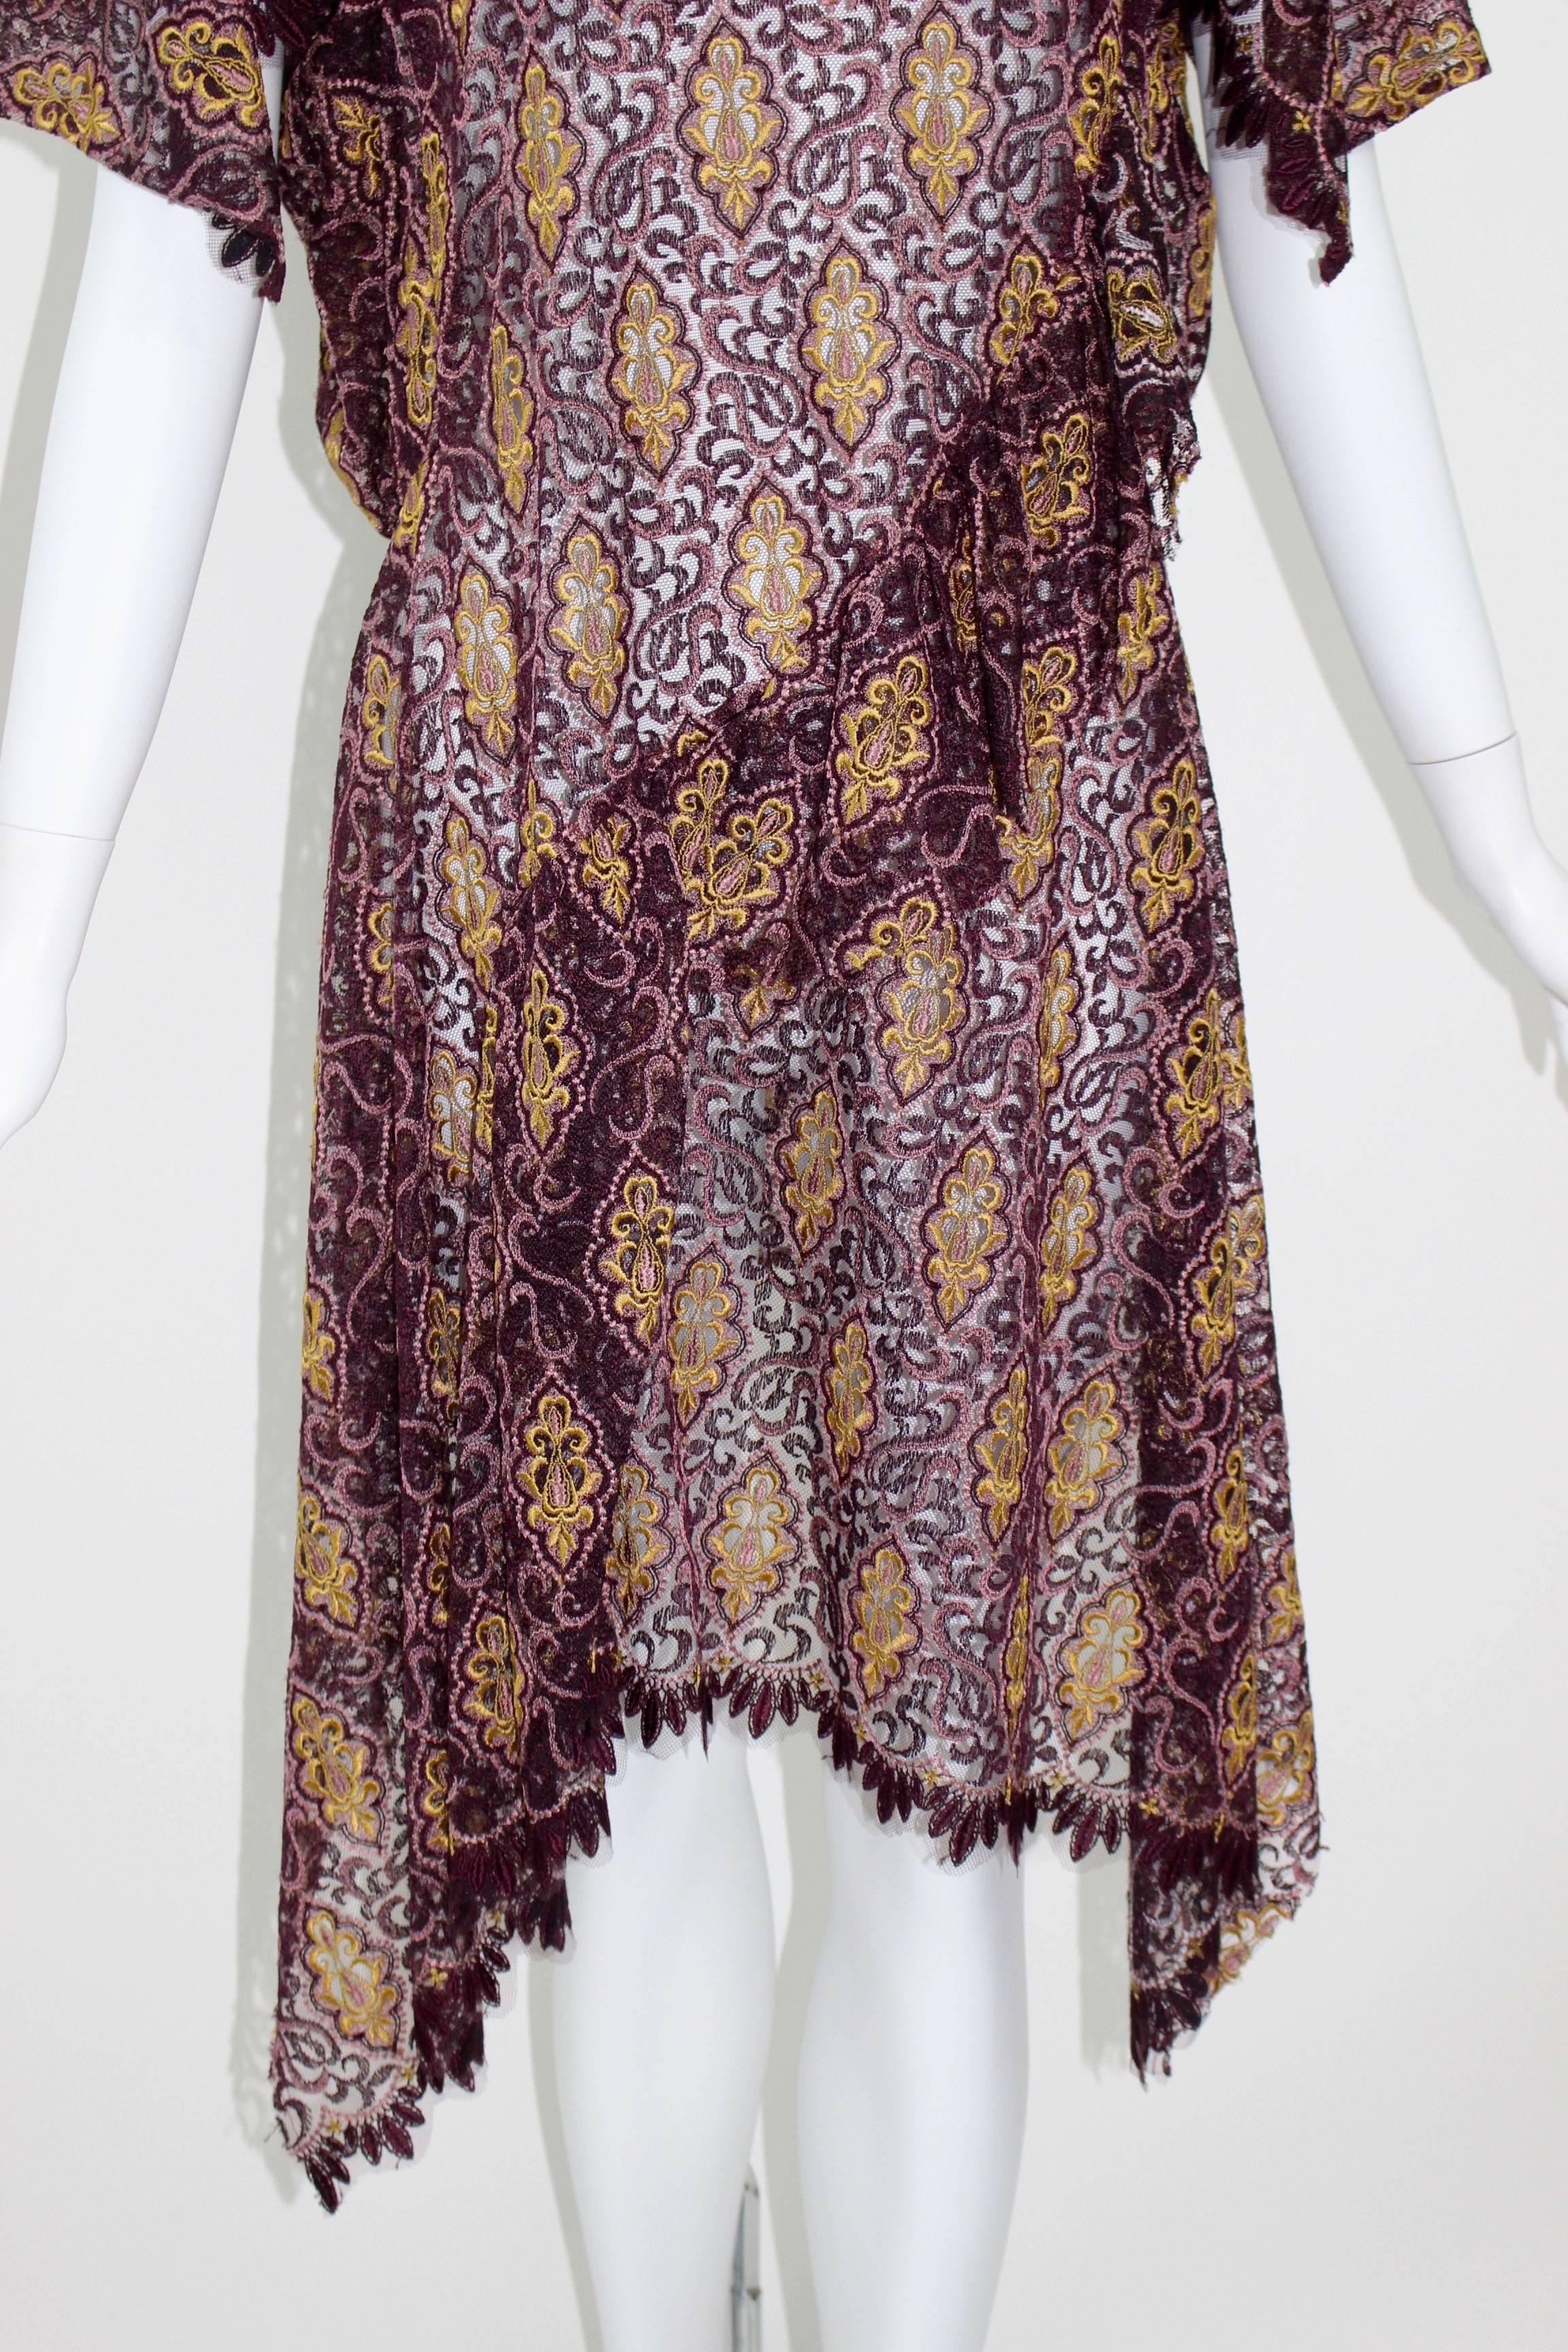  Junya Watanabe Comme des Garcons Burgundy Purple Gold Lace Kimono Sleeve Dress In Excellent Condition For Sale In Boca Raton, FL